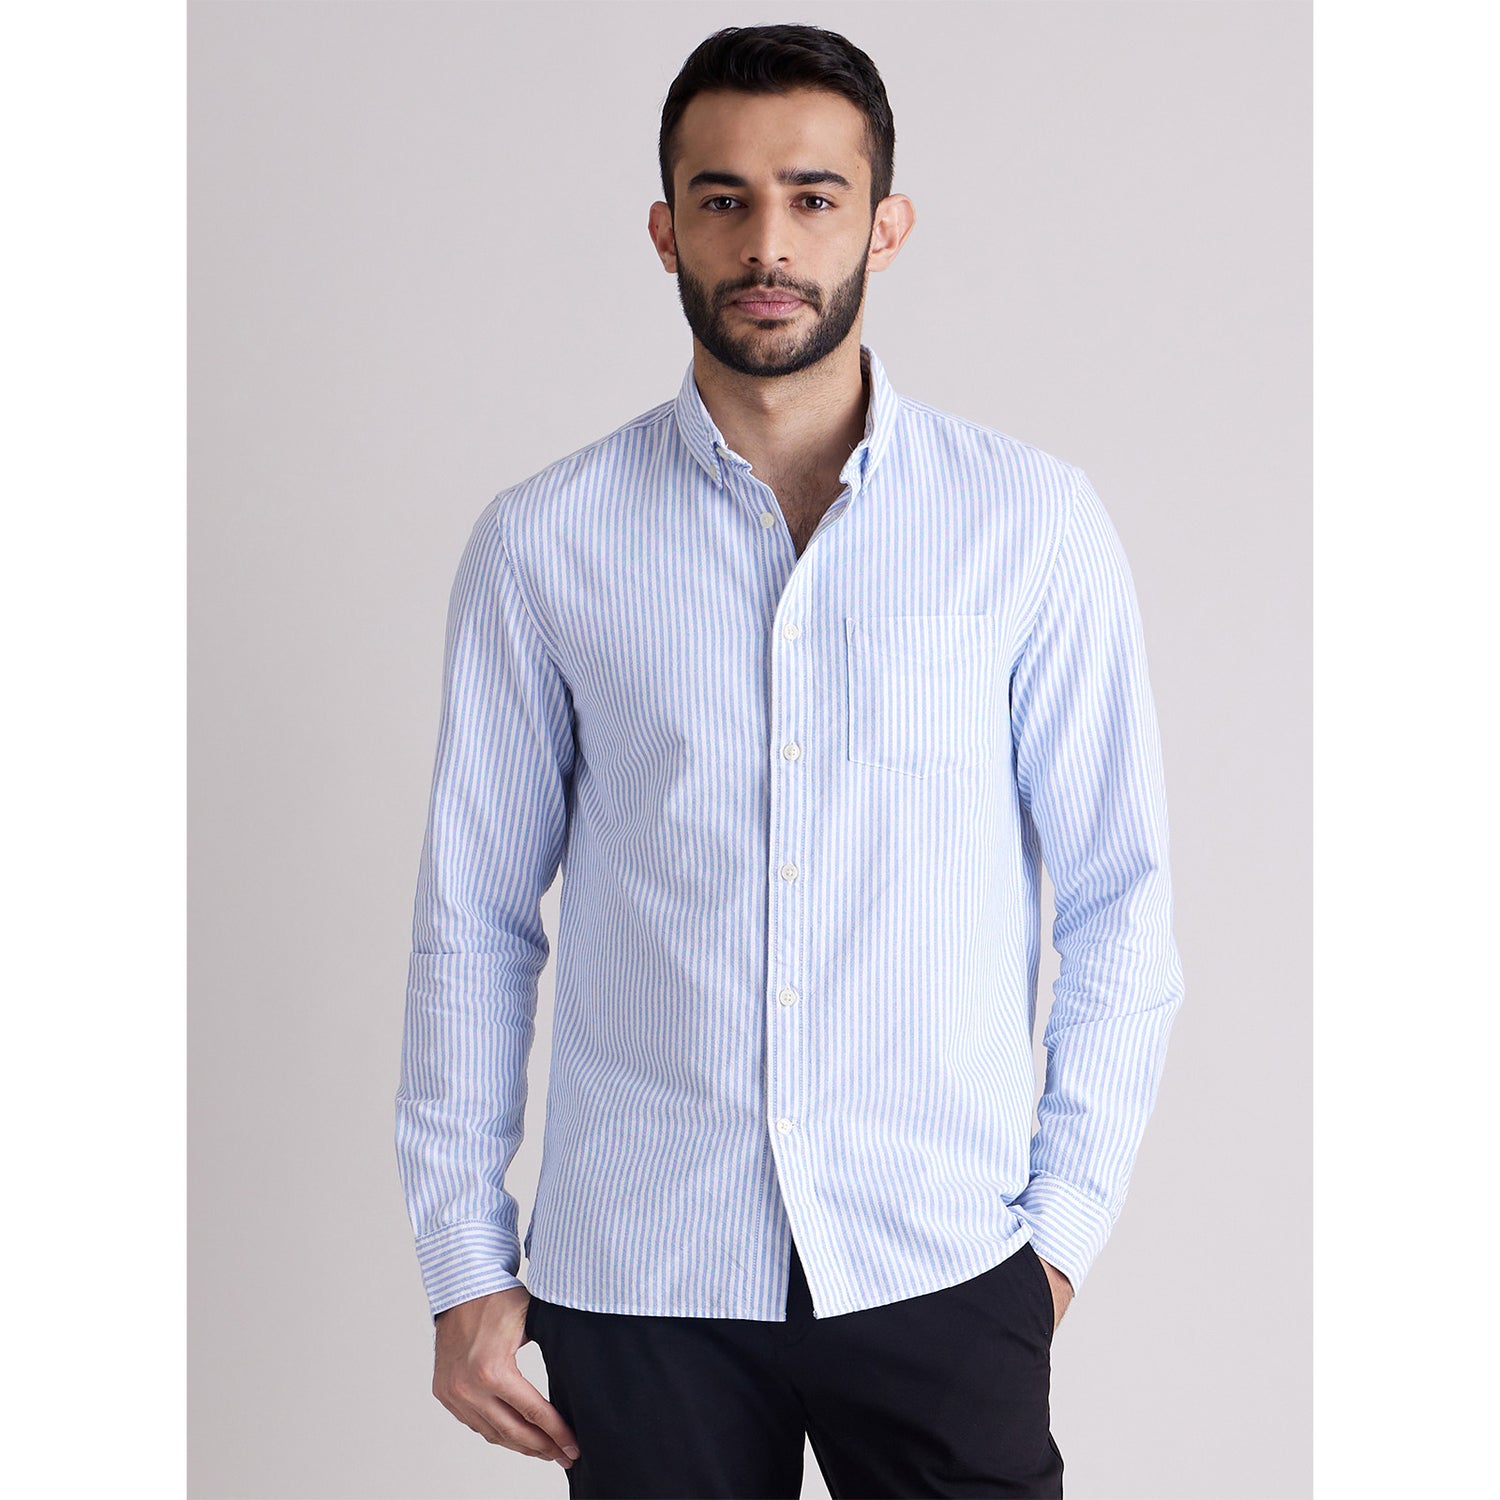 Blue Classic Striped Casual Cotton Shirt (CAOXFORDY)